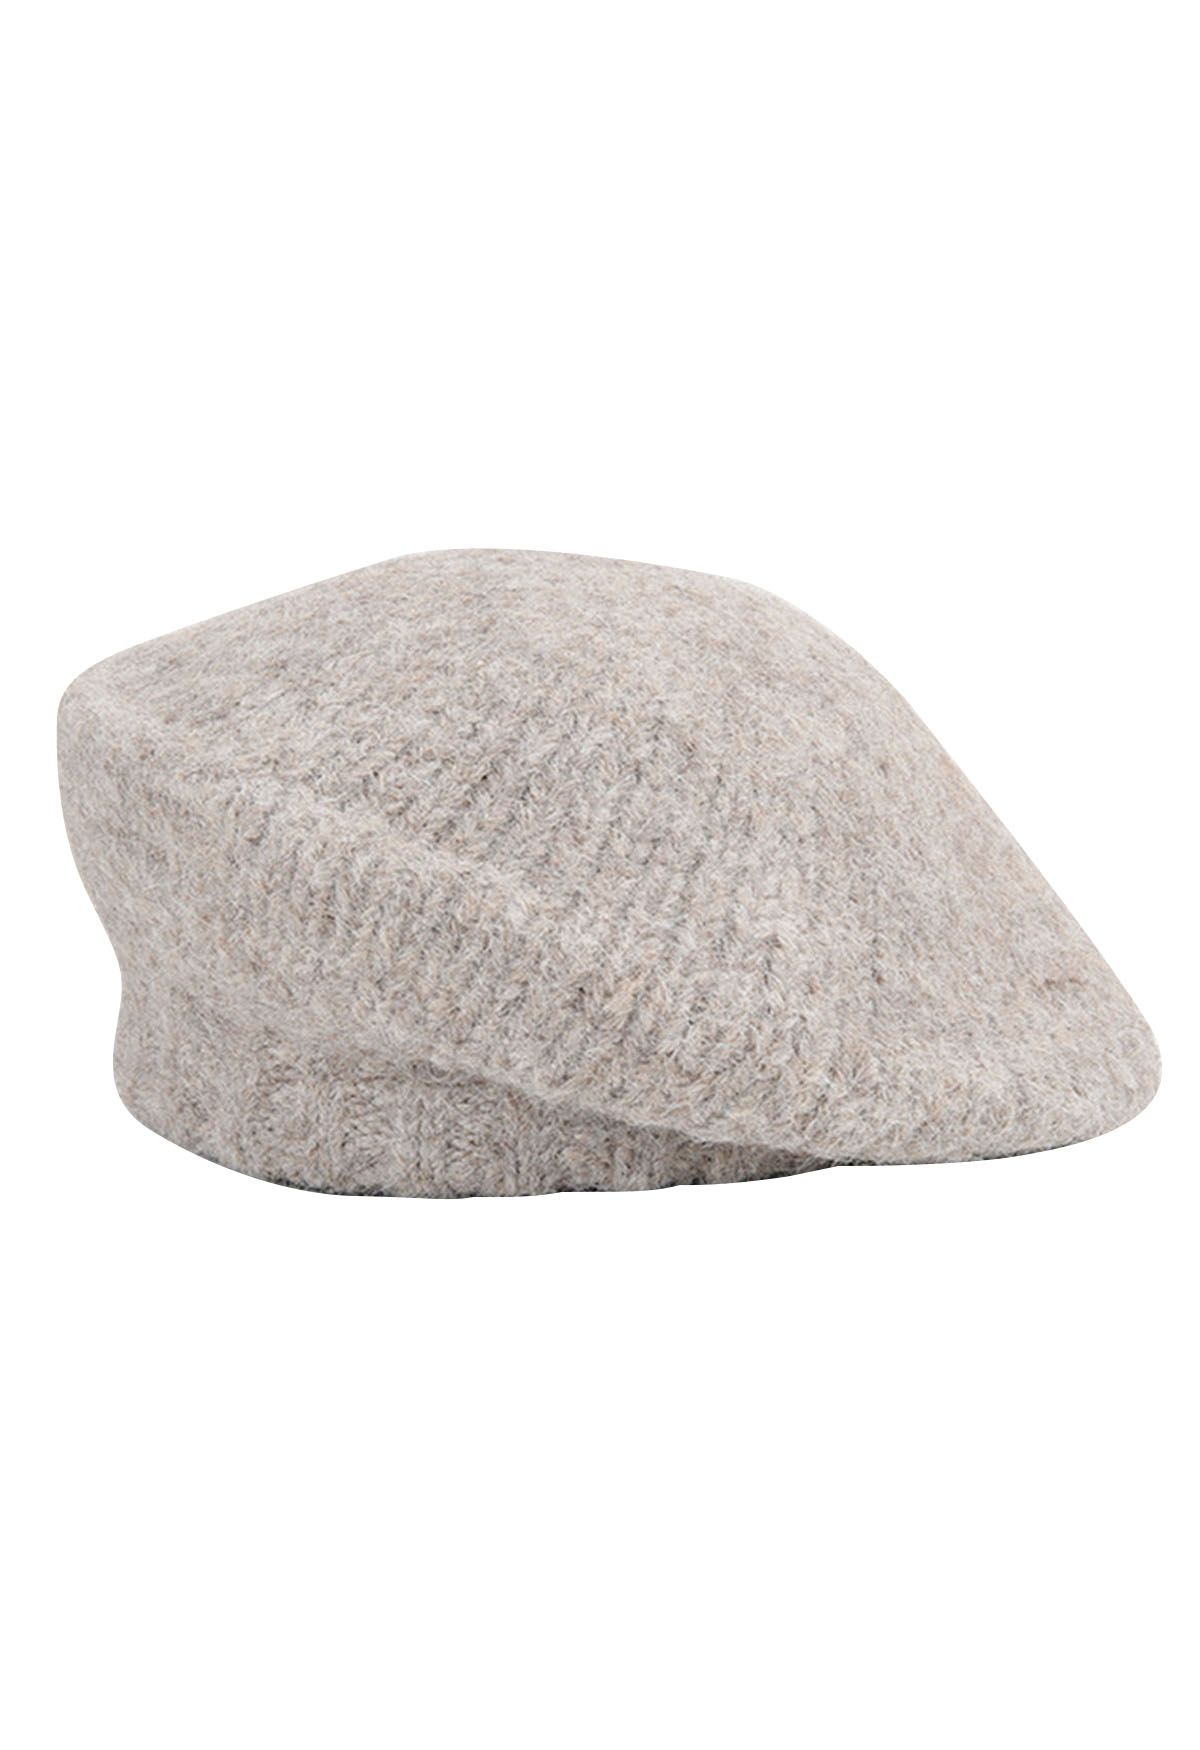 Fuzzy Wool-Blend Beret Hat in Oatmeal - Retro, Indie and Unique Fashion